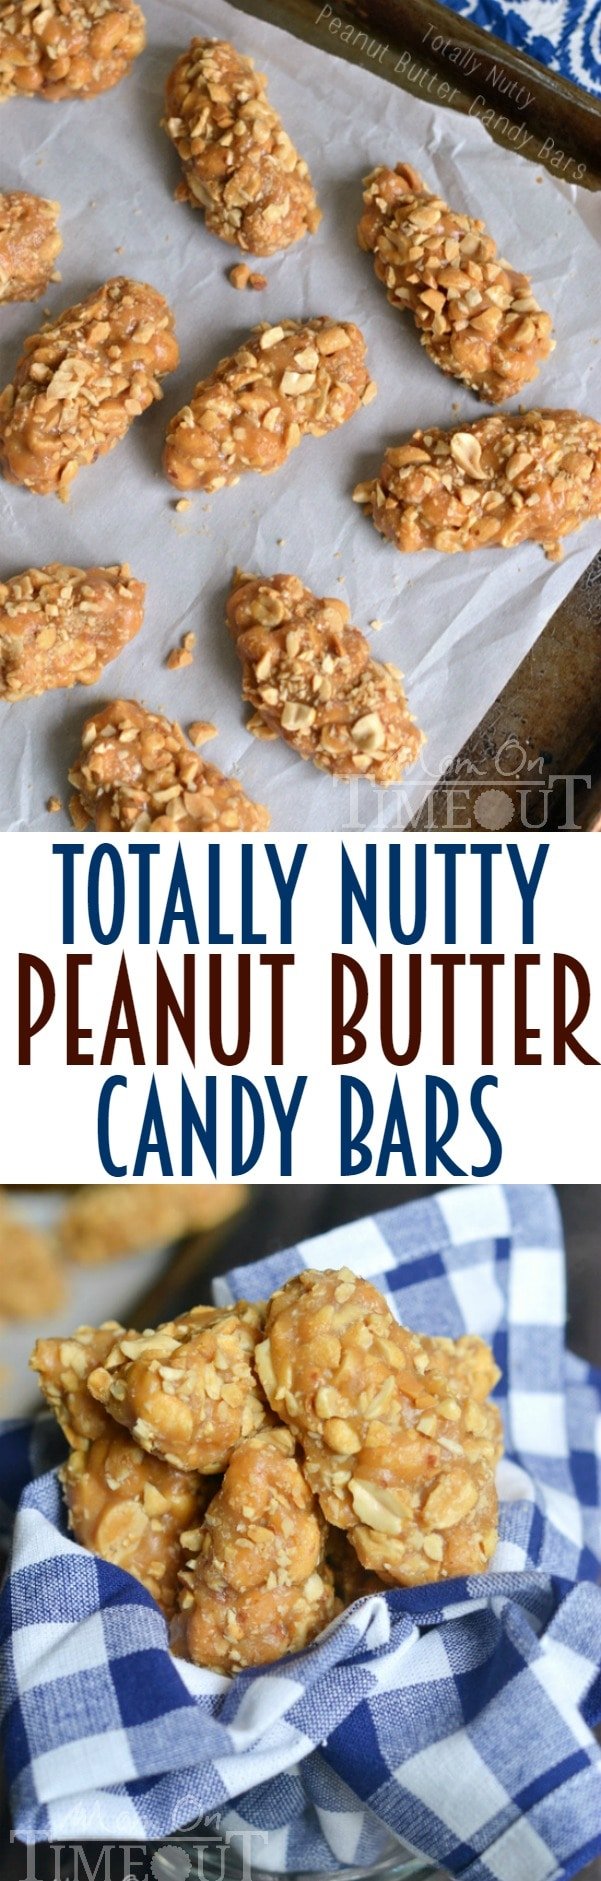 No-Bake, Easy, 4 Ingredient Totally Nutty Peanut Butter Candy Bars | MomOnTimeout.com